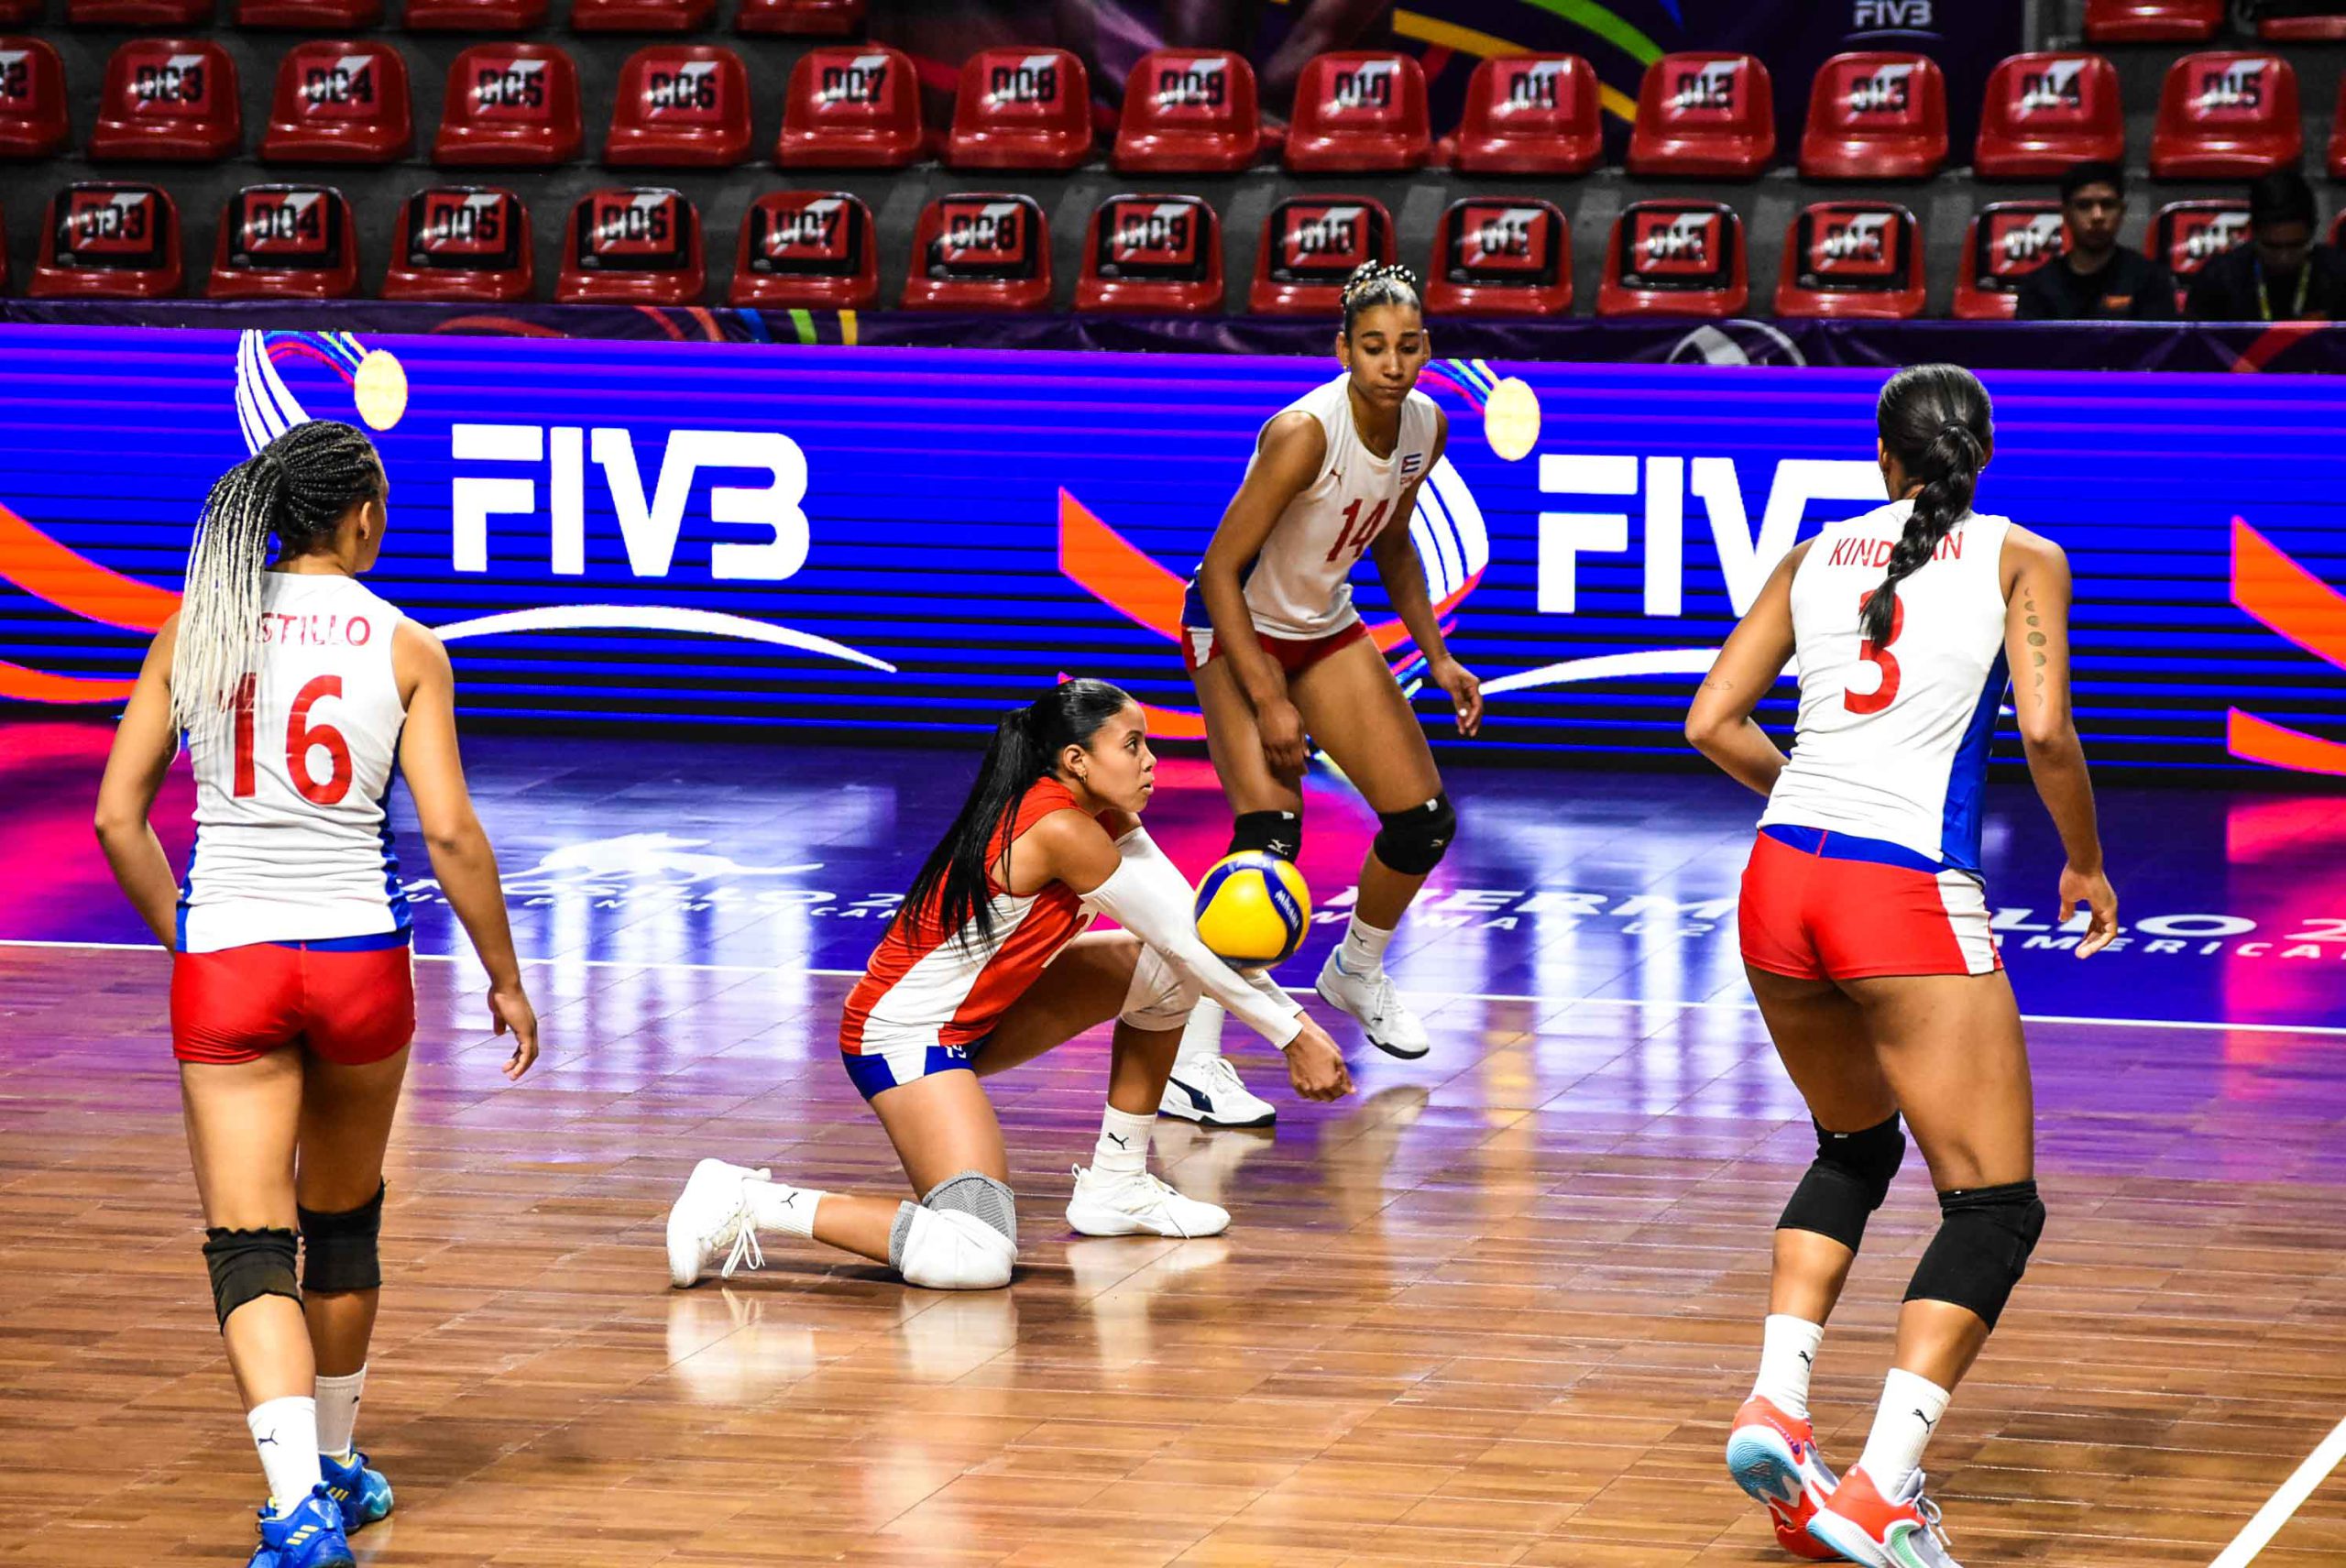 Cuba beats Costa Rica to play for fifth place against Canada